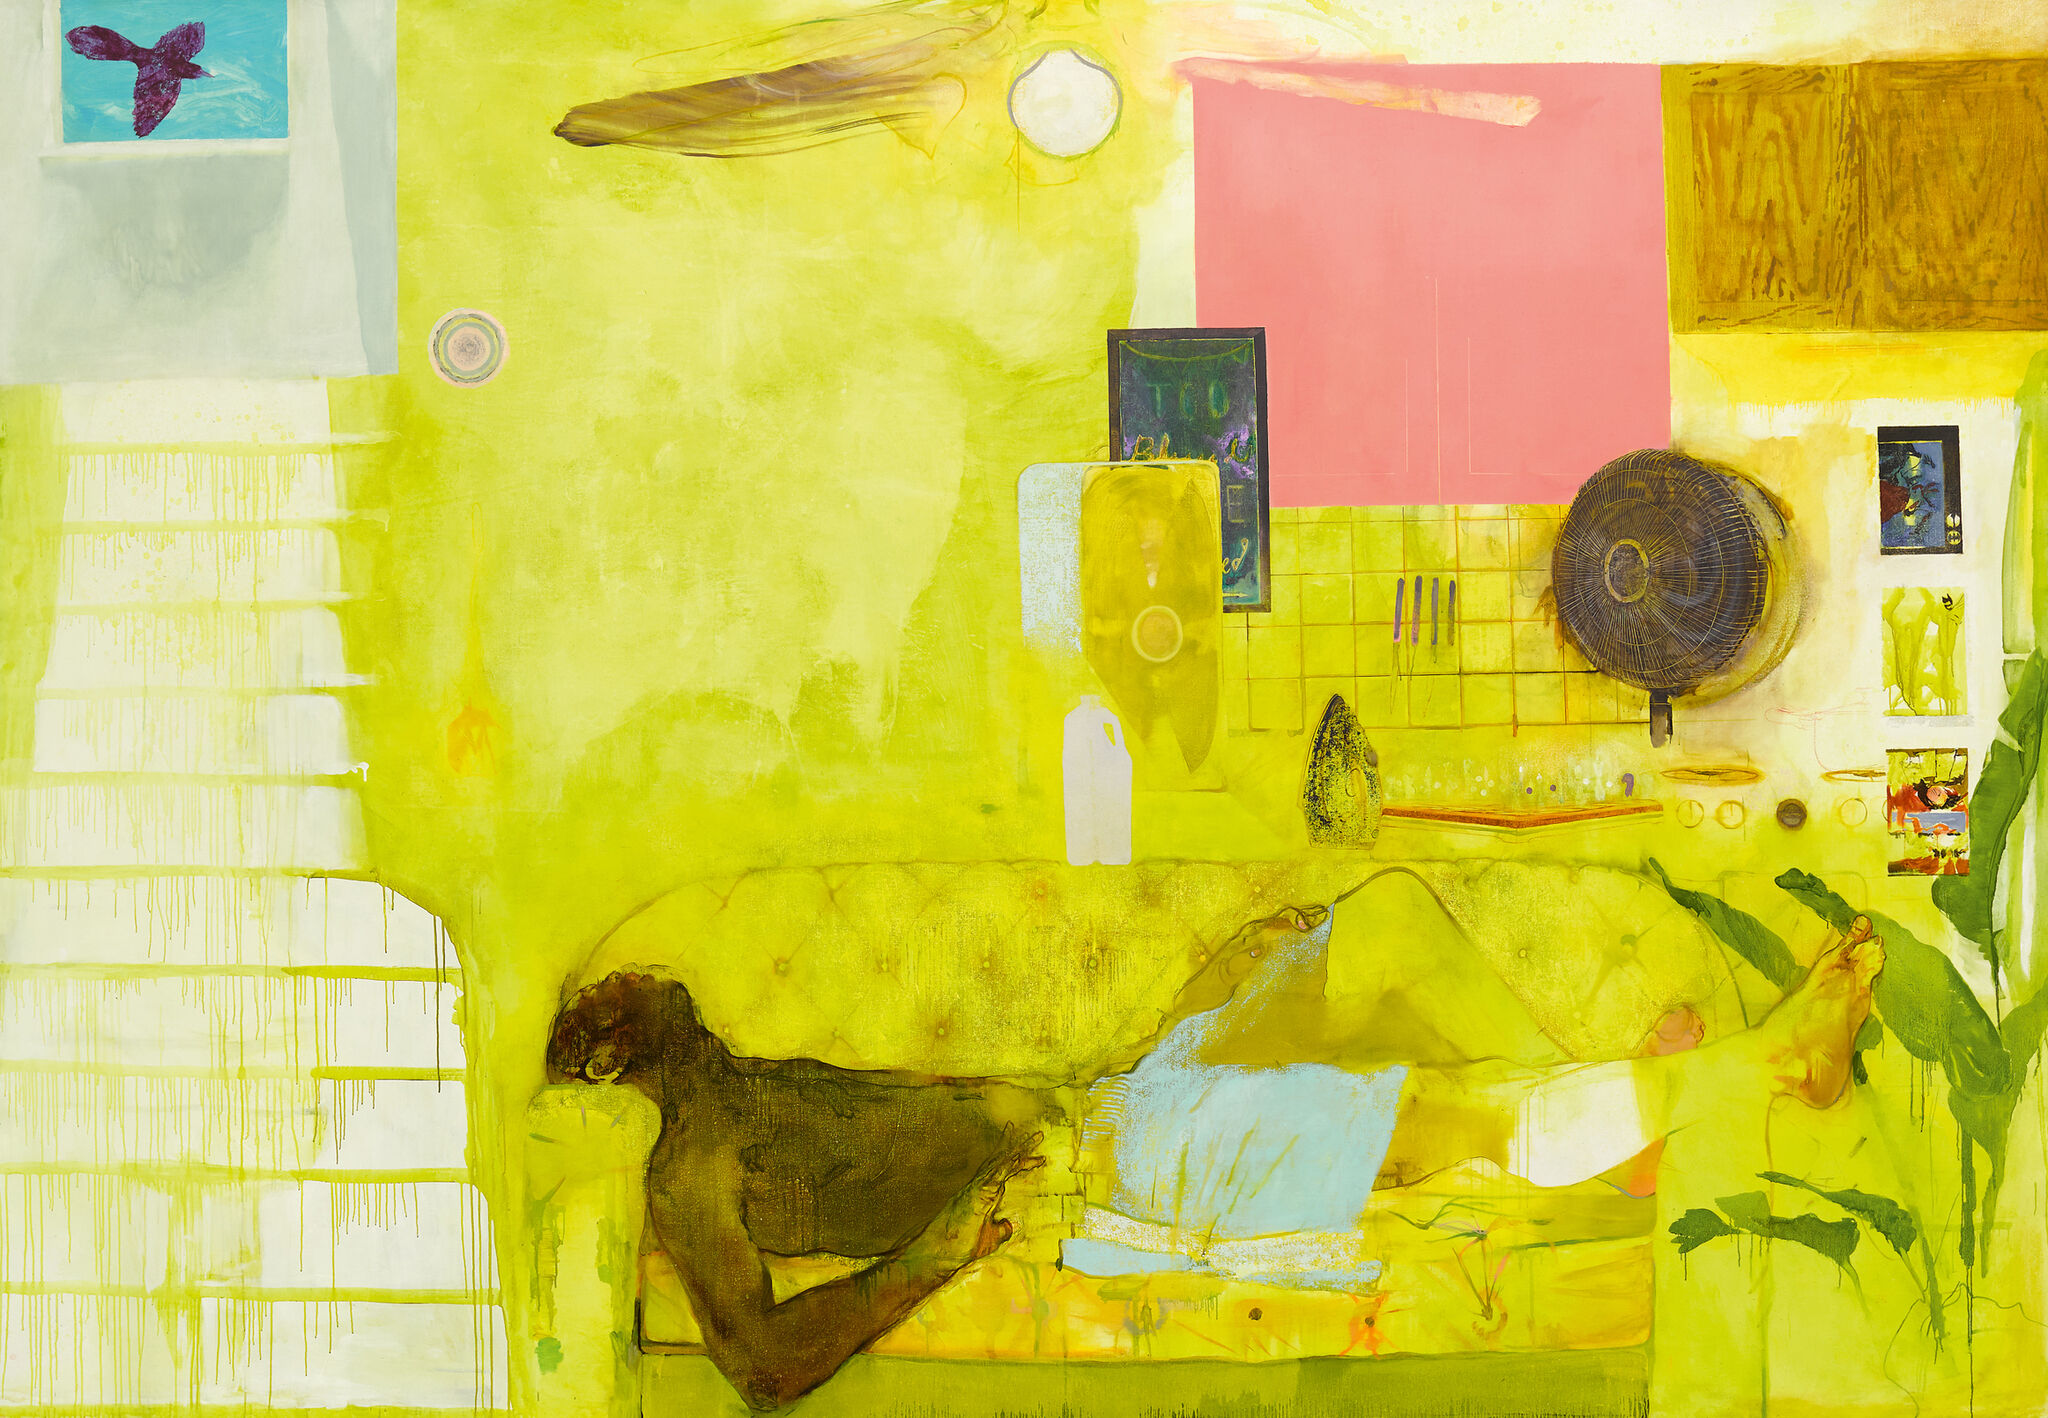 A man lies on a couch in a room whose predominant color scheme is yellow, with a bare wall and assorted furnishings in the background.